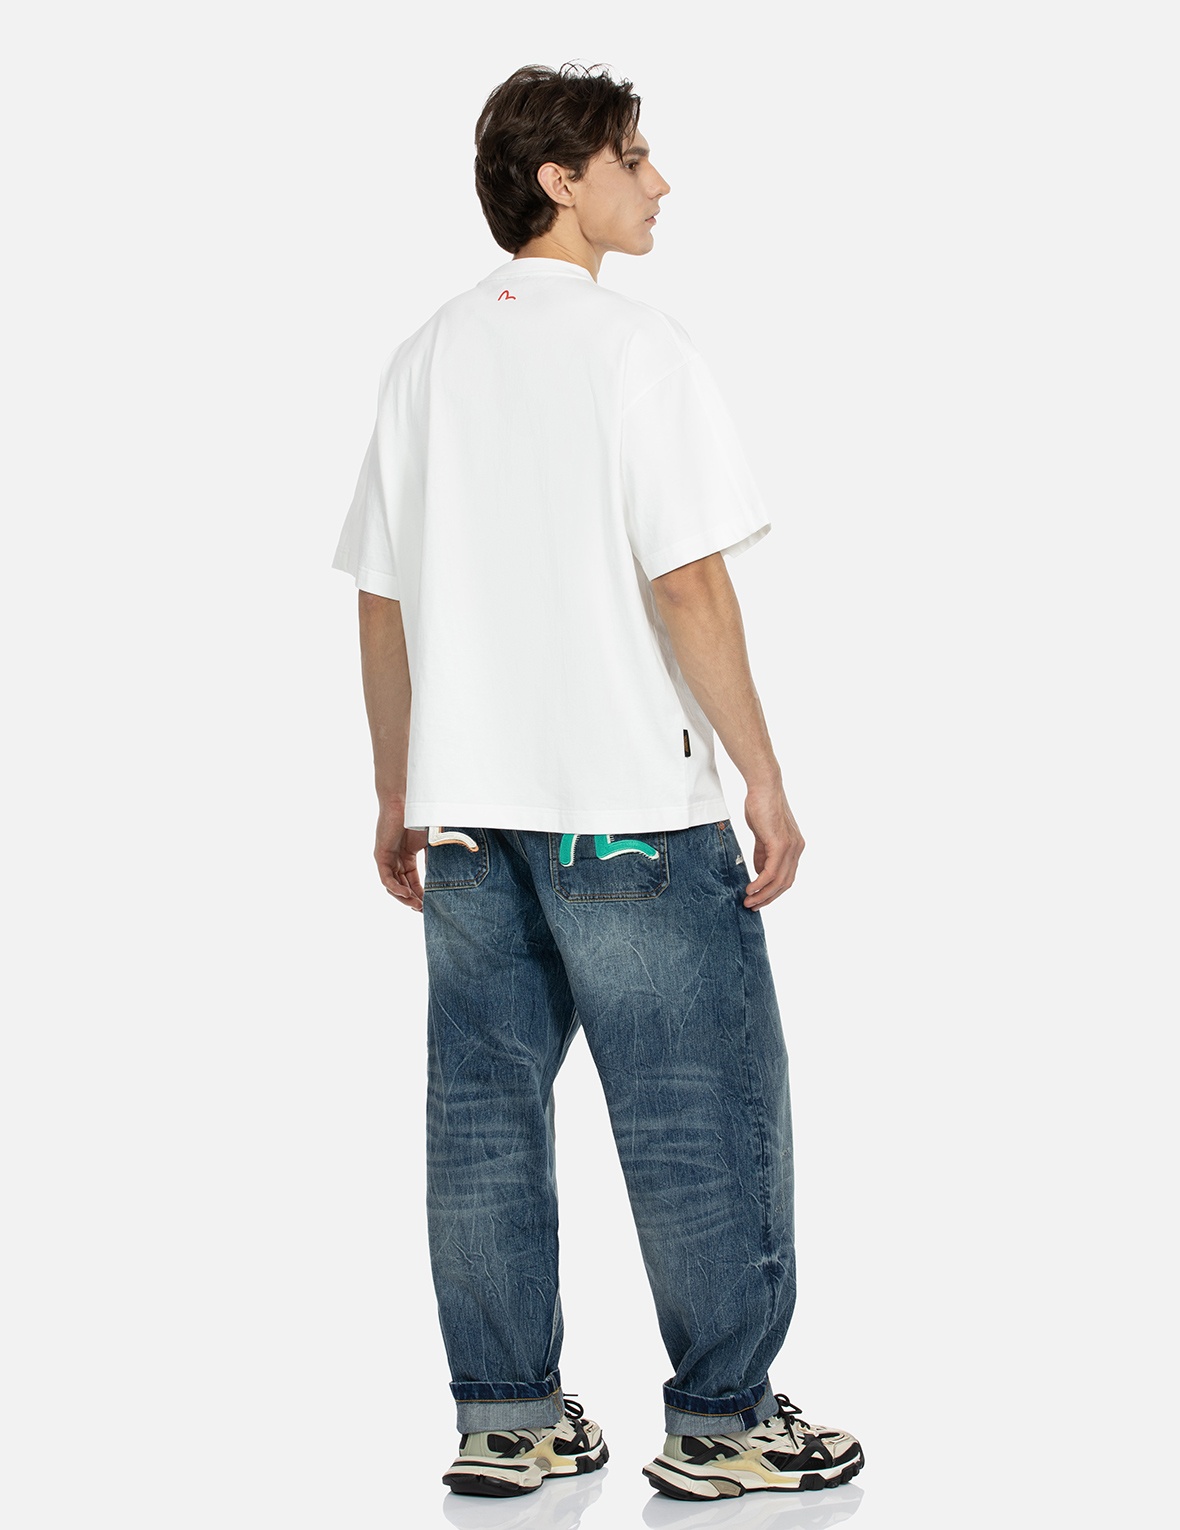 SEAGULL PRINT AND EMBROIDERY RELAX FIT JEANS - 3